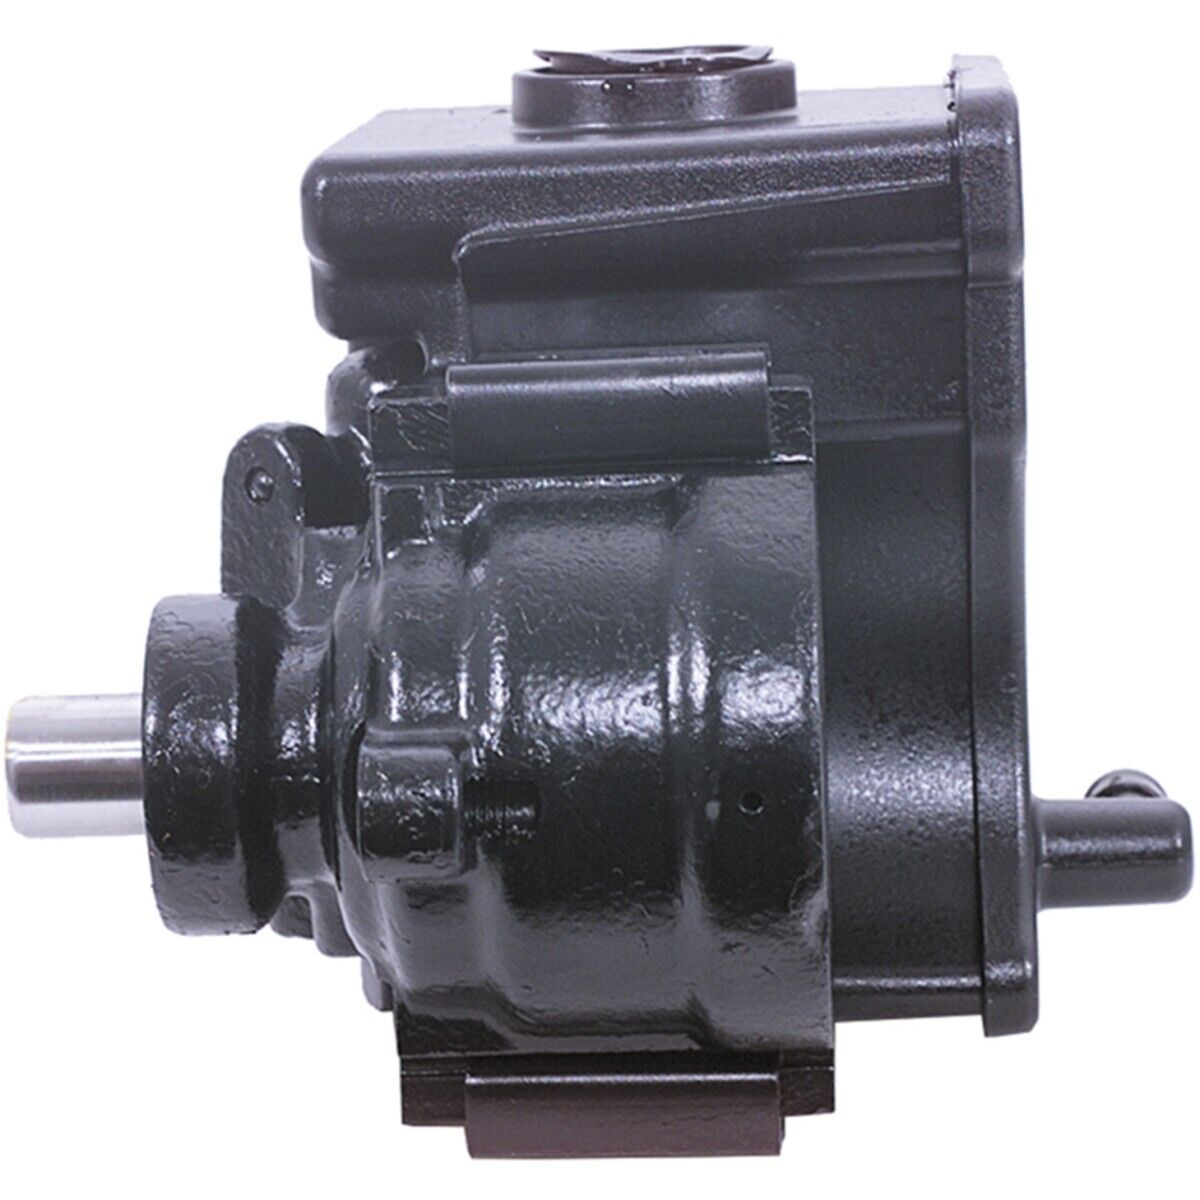 20-41894 A1 Cardone Power Steering Pump for Olds Le Sabre NINETY EIGHT LeSabre